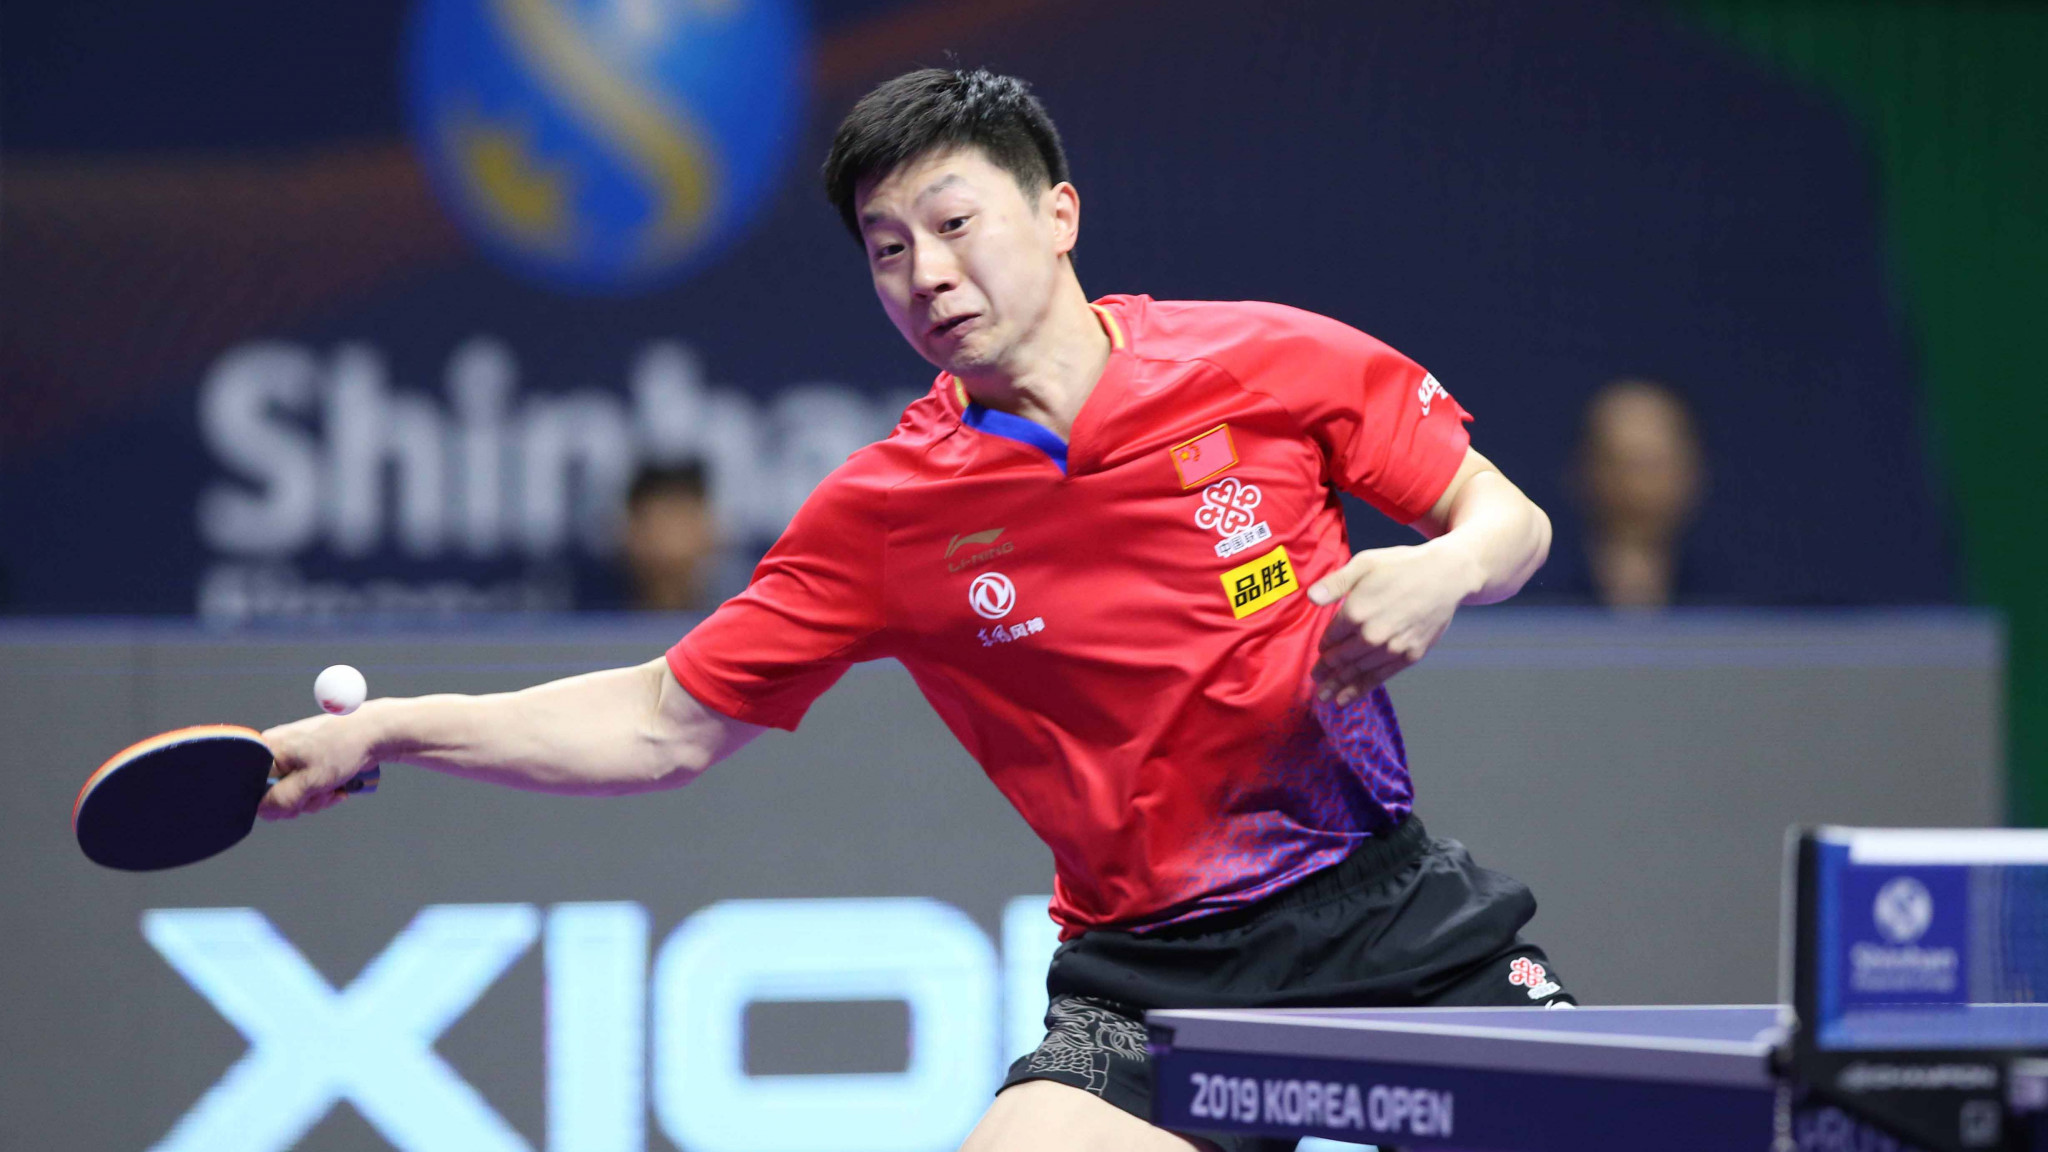 Reigning world and Olympic champion Ma Long survived a scare against home player Lim Jong-hoon to book his place in the men's singles quarter-finals at the ITTF Korea Open in Busan ©An Sungho/ITTF